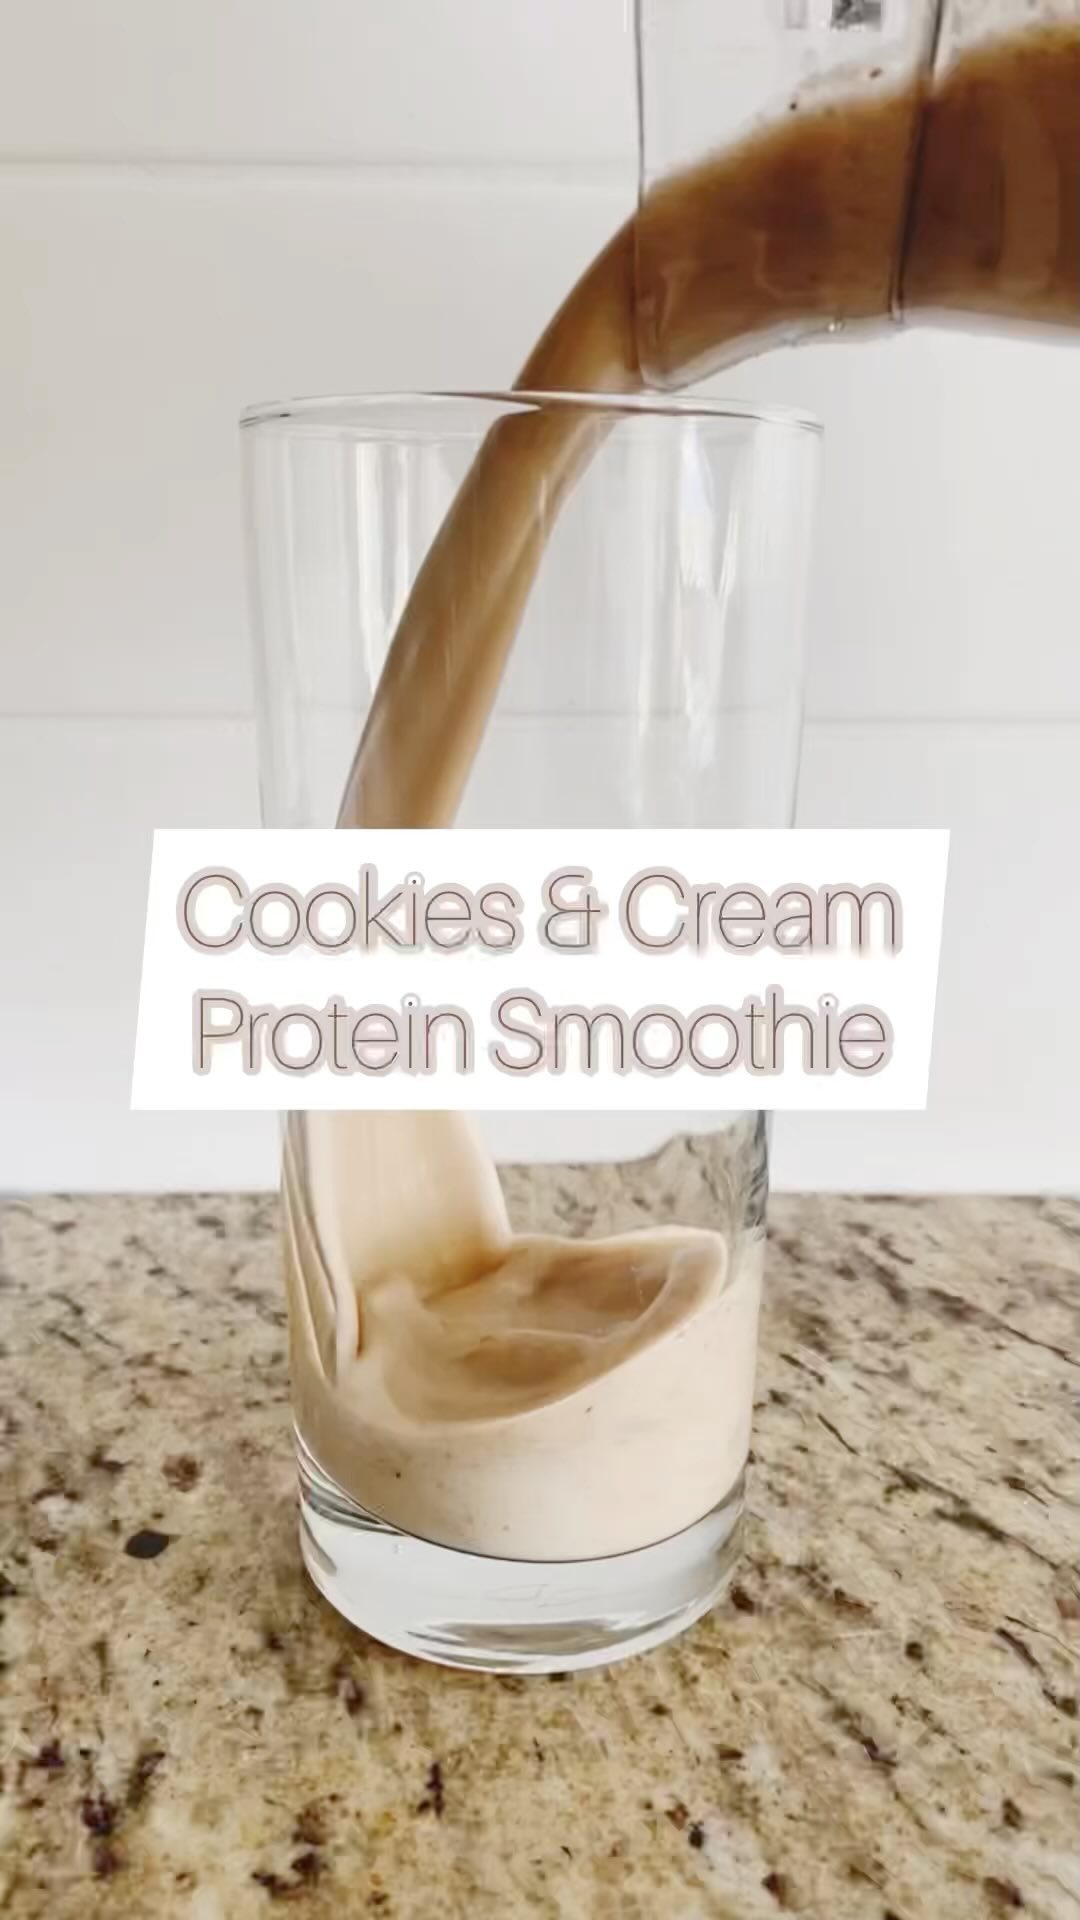 Cookies & Cream Protein Smoothie 🍪

1 cup coconut milk
1 tbsp almond butter
1 tbsp raw cacao nibs
1 scoop vanilla protein powder 
6-7 ice cubes

Blend well and enjoy! 

#proteinsmoothie #holisiticnutritionist #amandamillernutrition #healthysummerrecipes #dairyfreesmoothie #paleosmoothie #cookiesandcreamsmoothie #paleorecipes